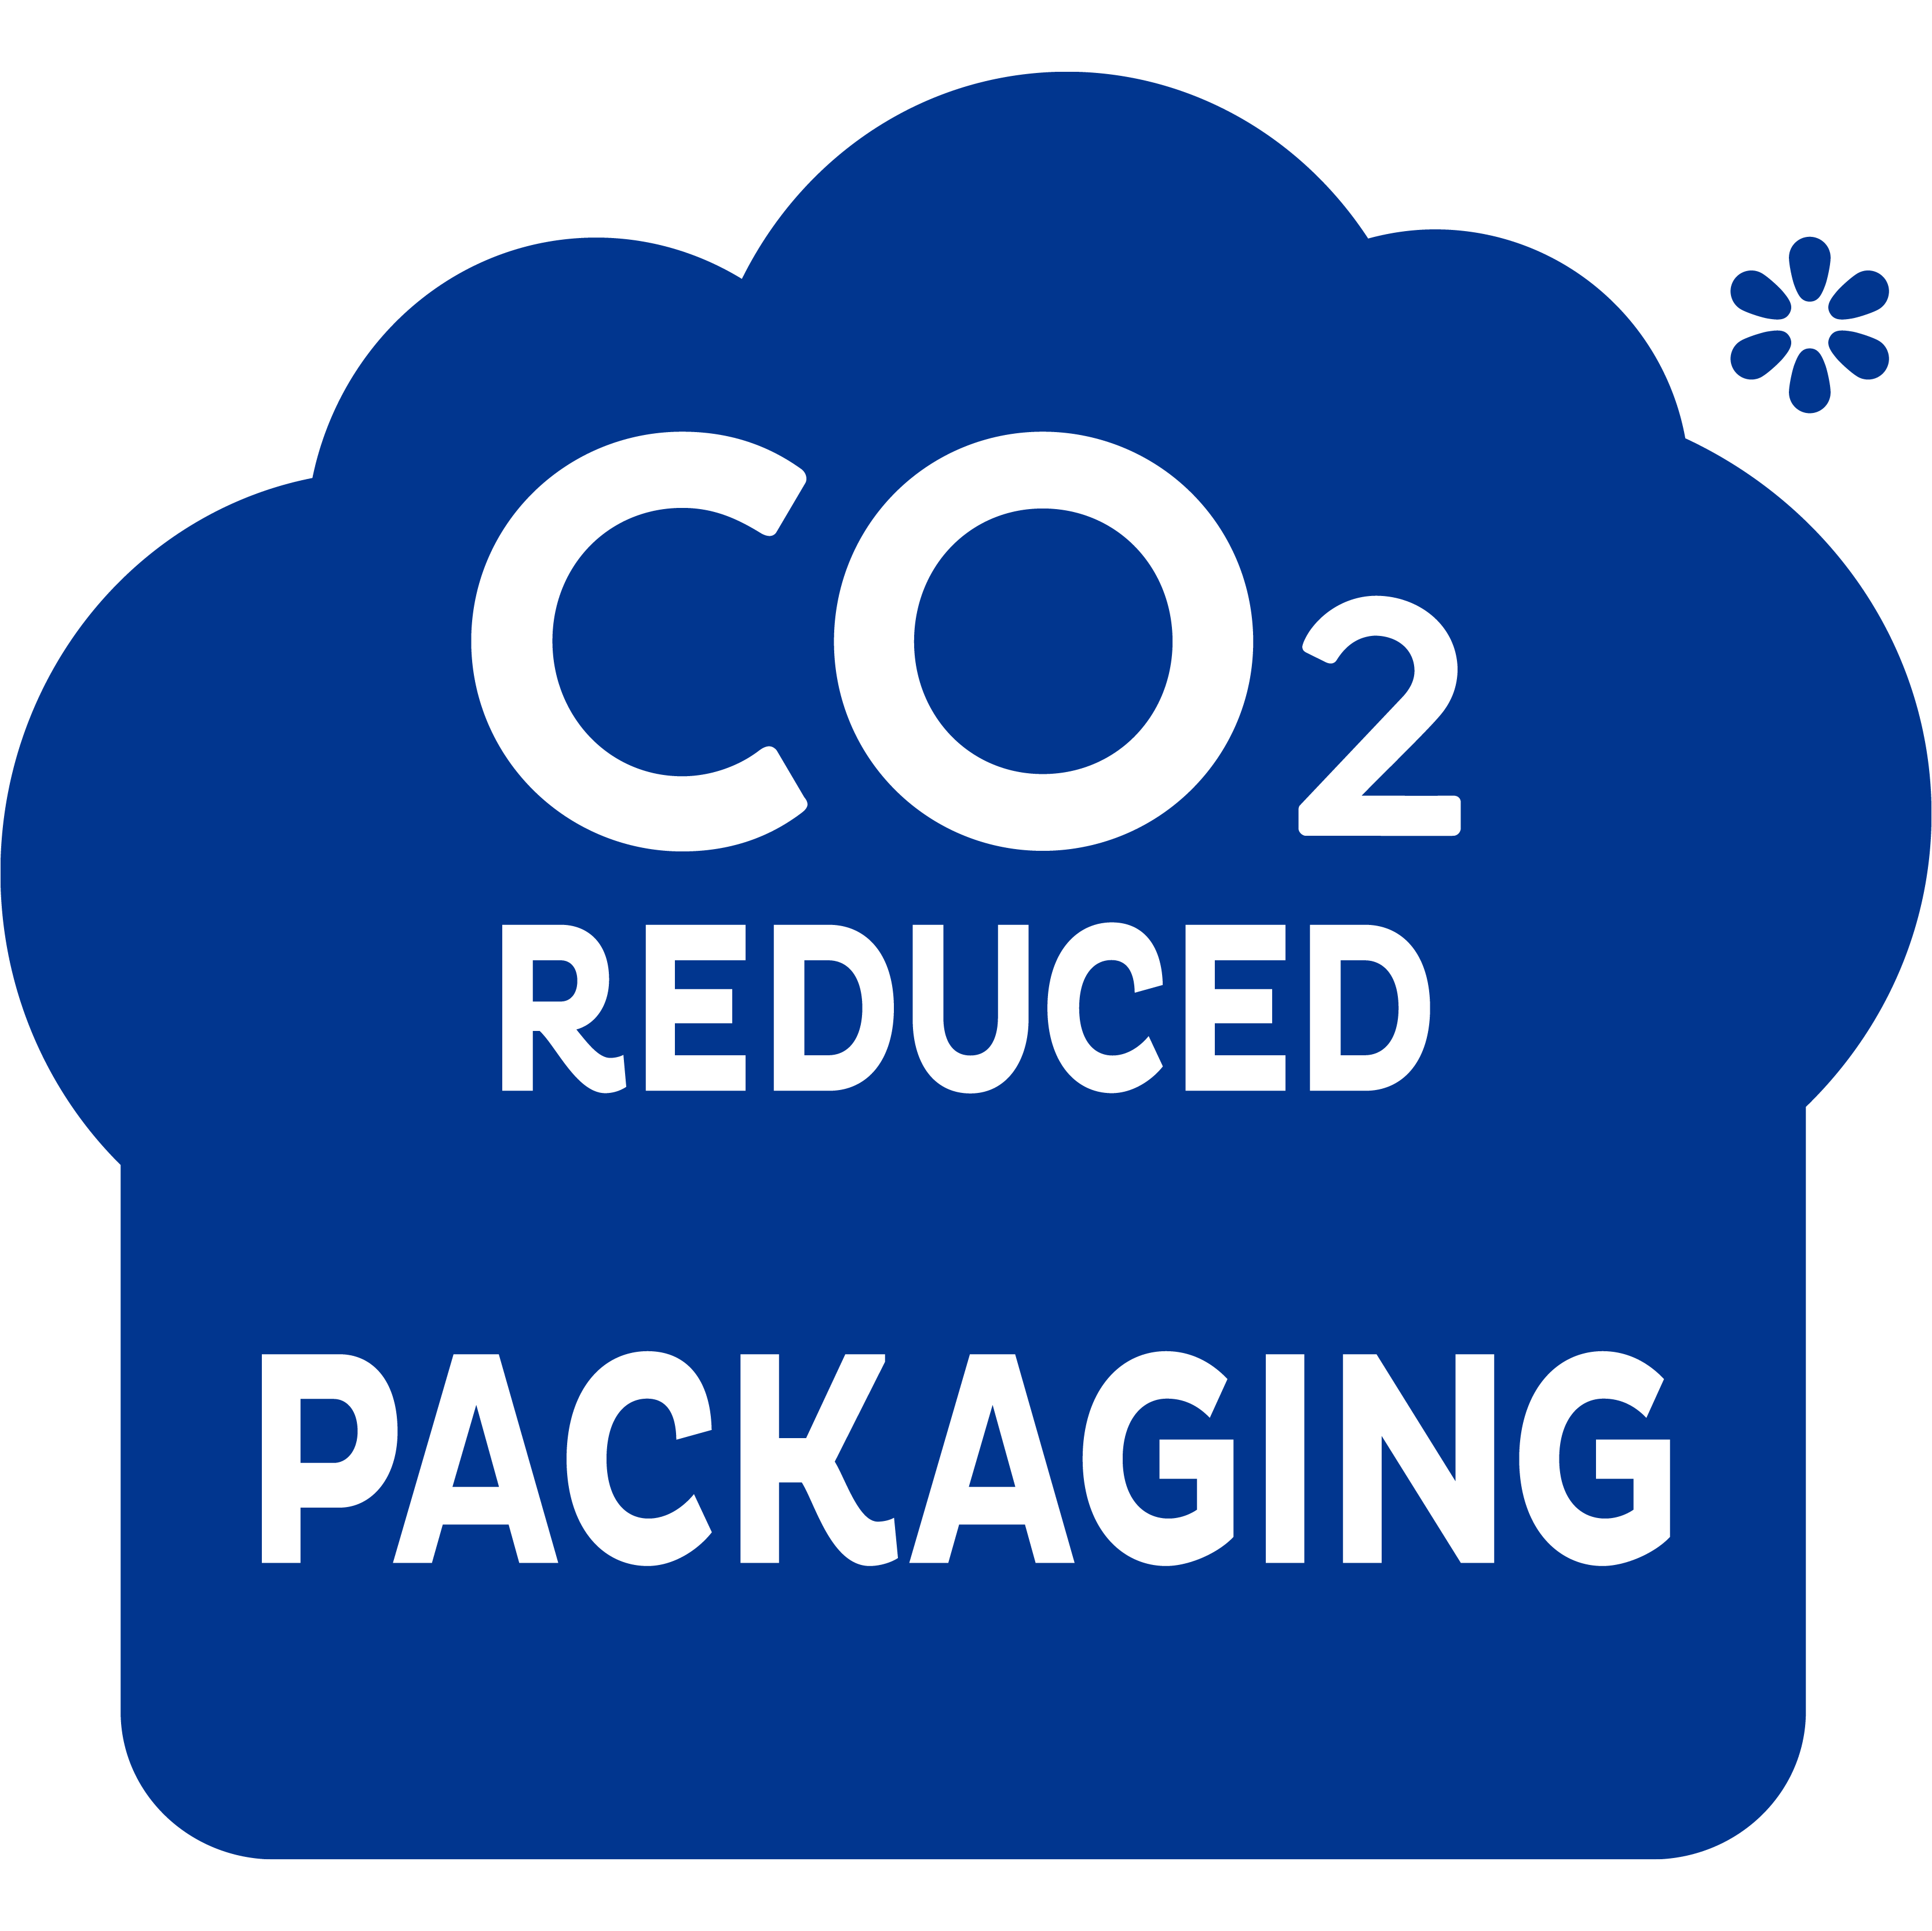 TENA Pants in a CO2 reduced packaging - for a step in the right direction